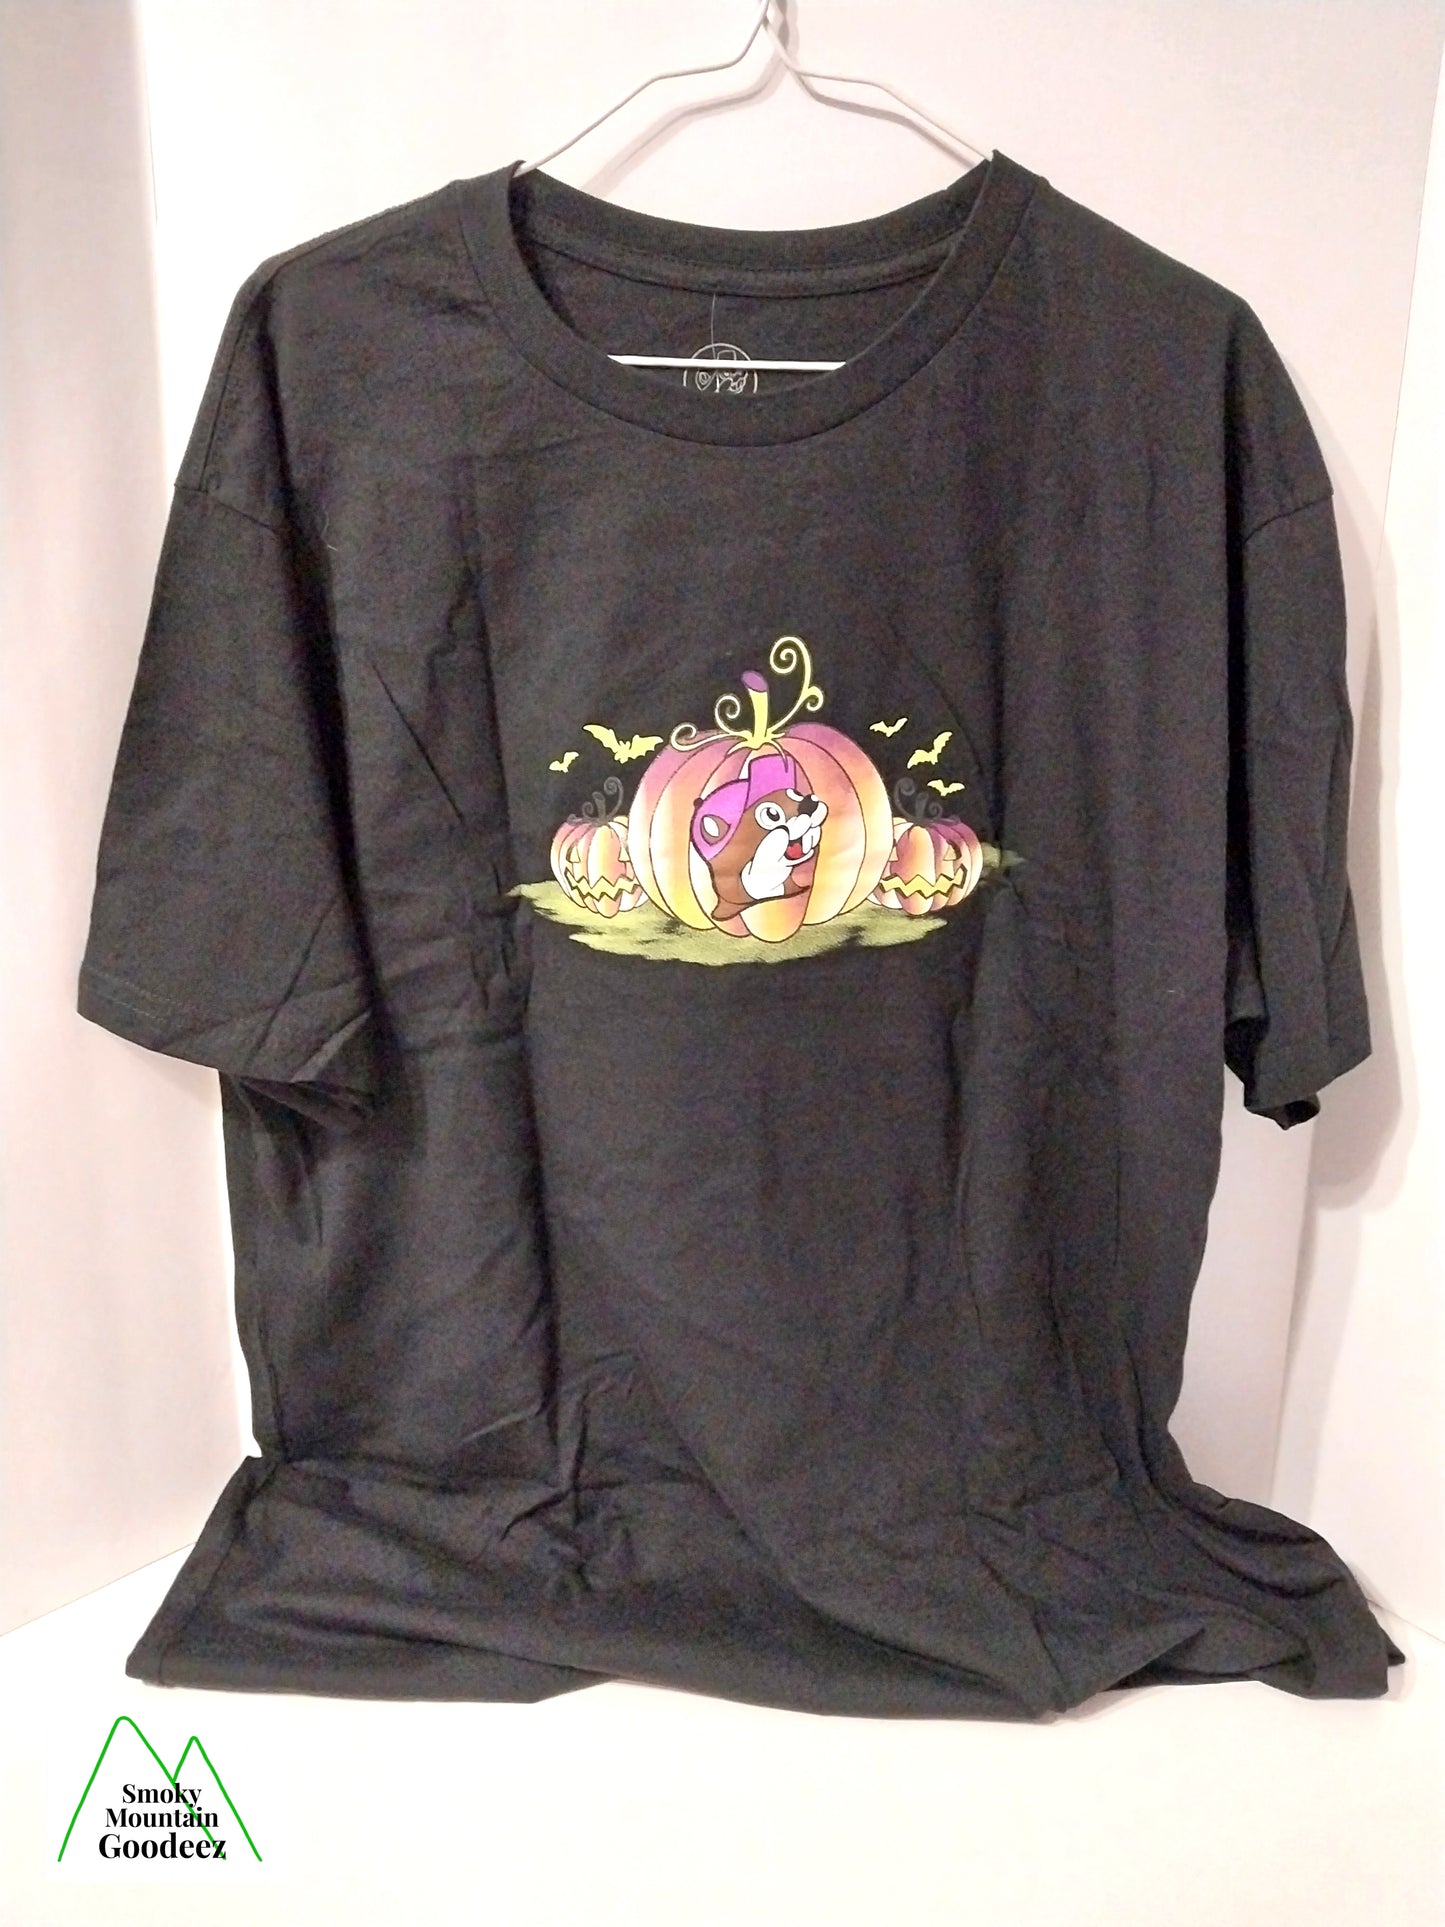 Buc-ee's Limited Edition Halloween "If You Got It, Haunt It" T-shirt